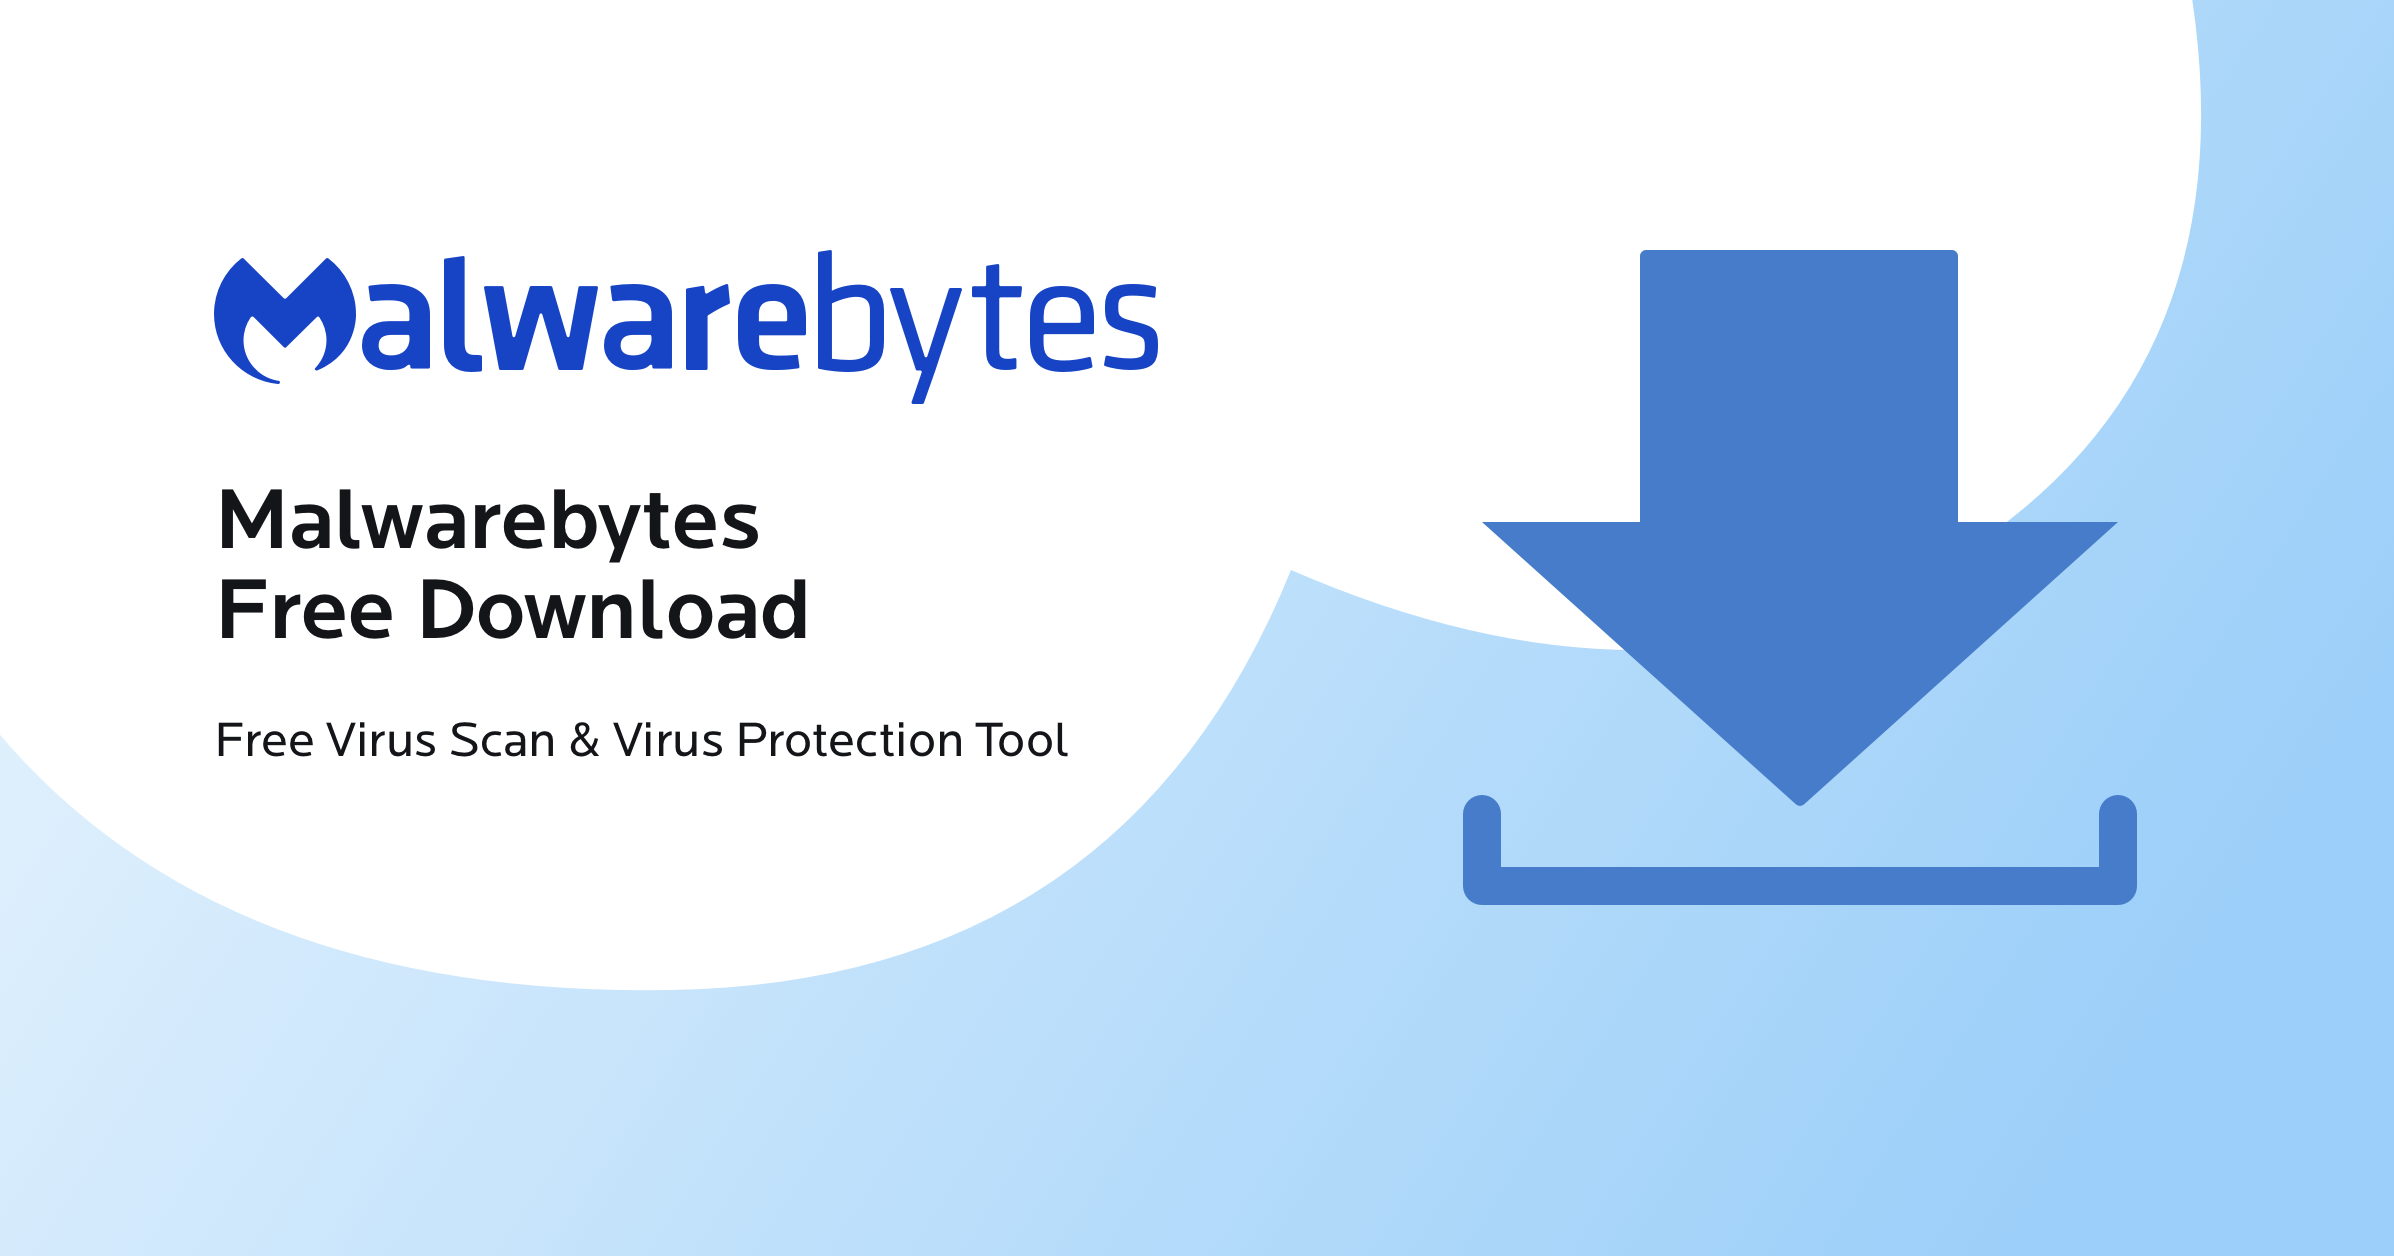 Download and install a reputable anti-malware program
Run a full system scan to detect and remove any malware